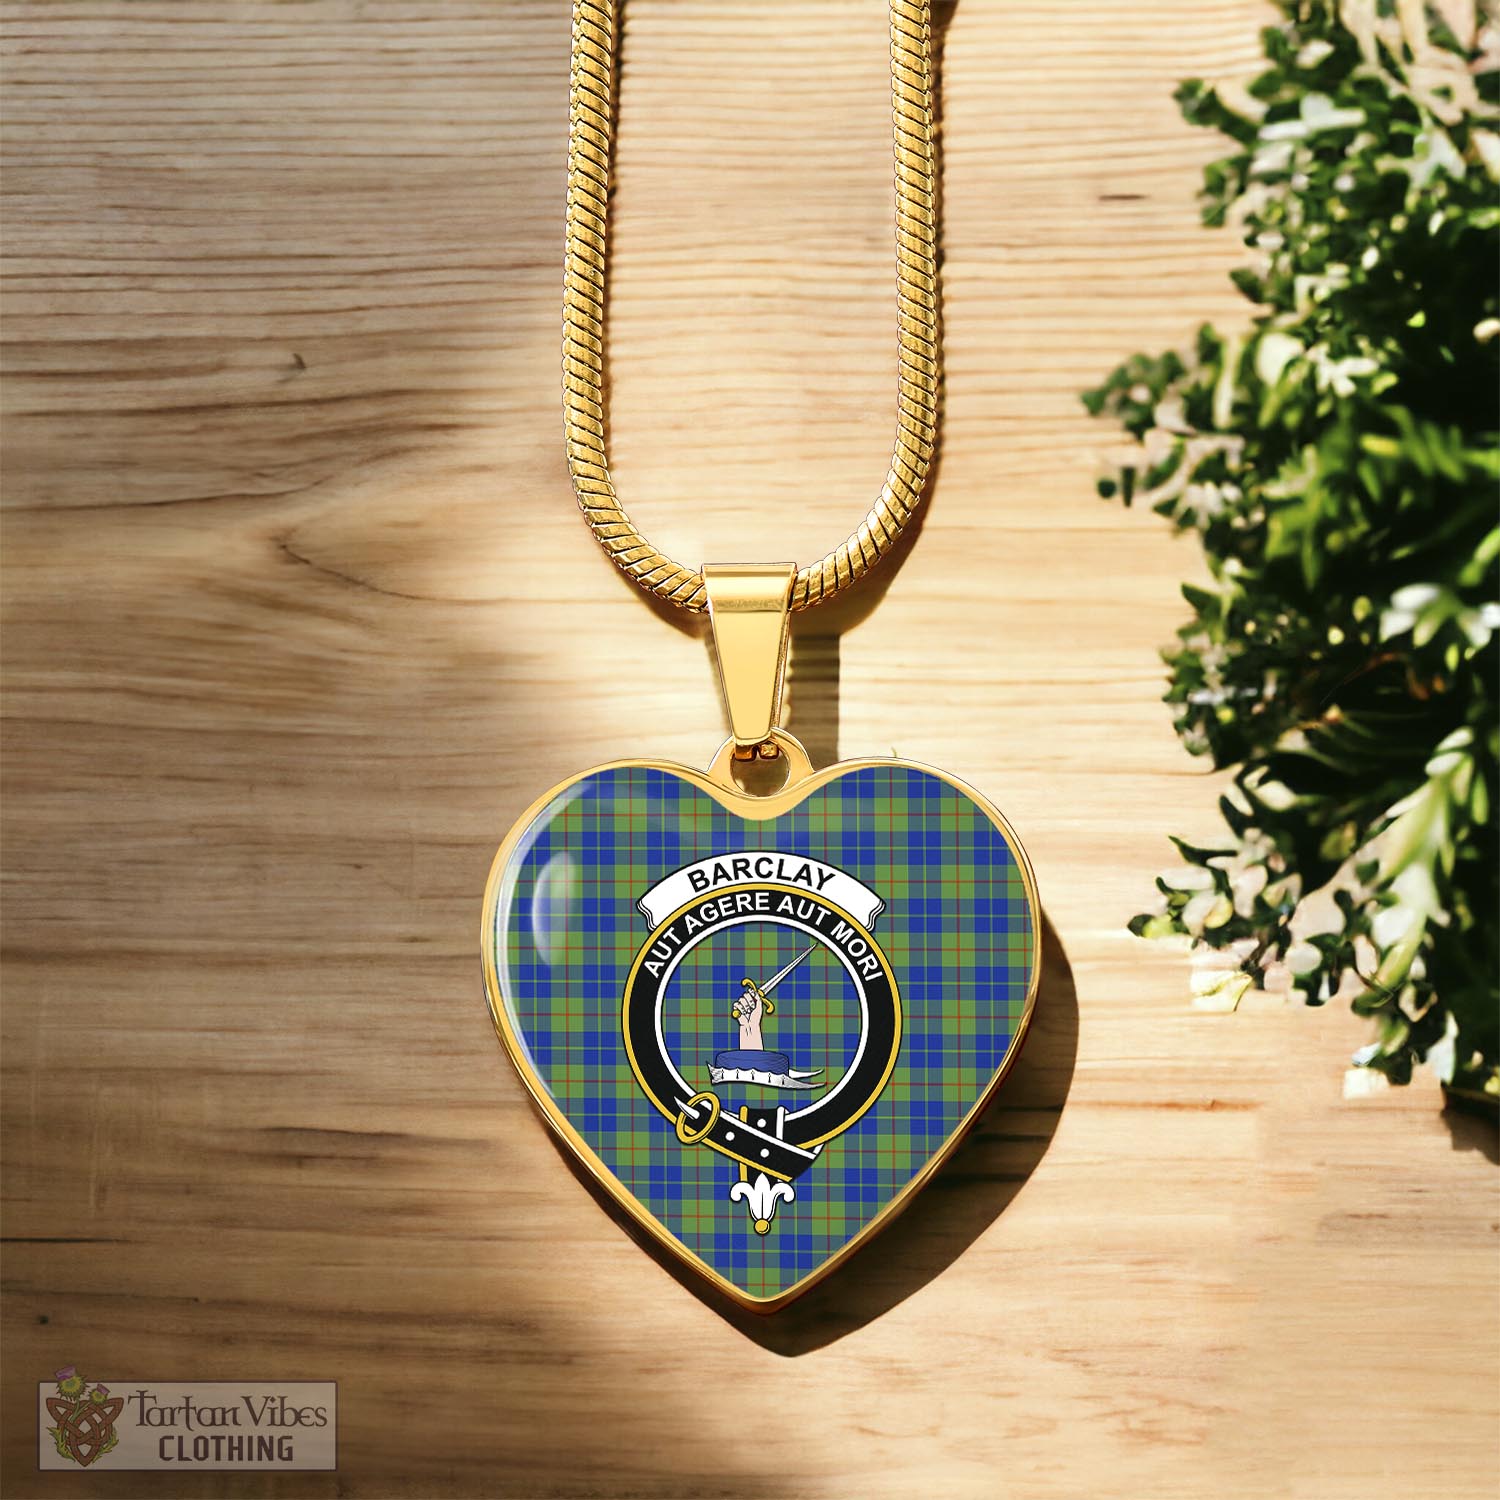 Tartan Vibes Clothing Barclay Hunting Ancient Tartan Heart Necklace with Family Crest